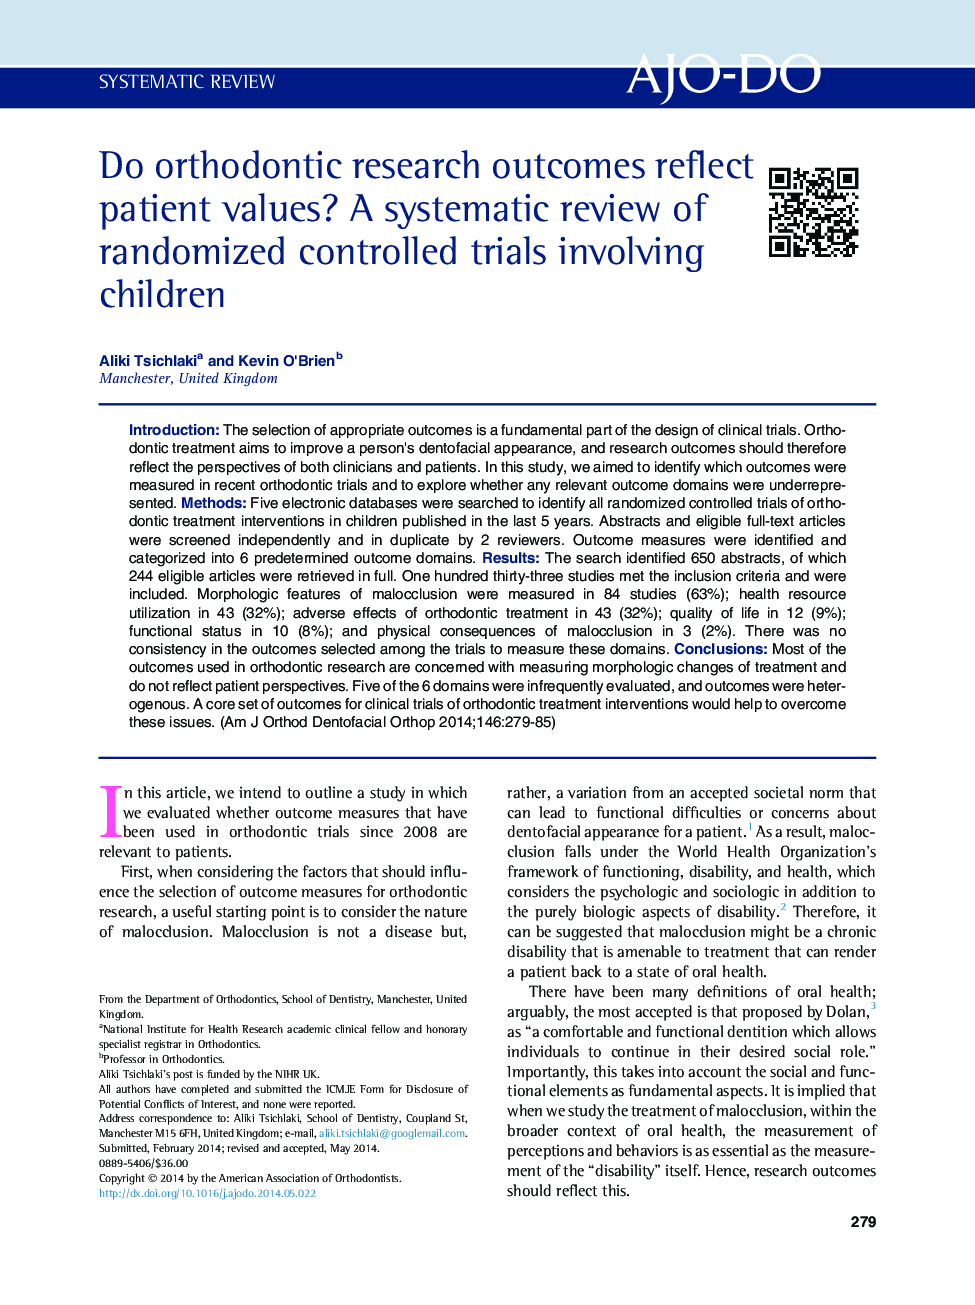 Do orthodontic research outcomes reflect patient values? A systematic review of randomized controlled trials involving children 